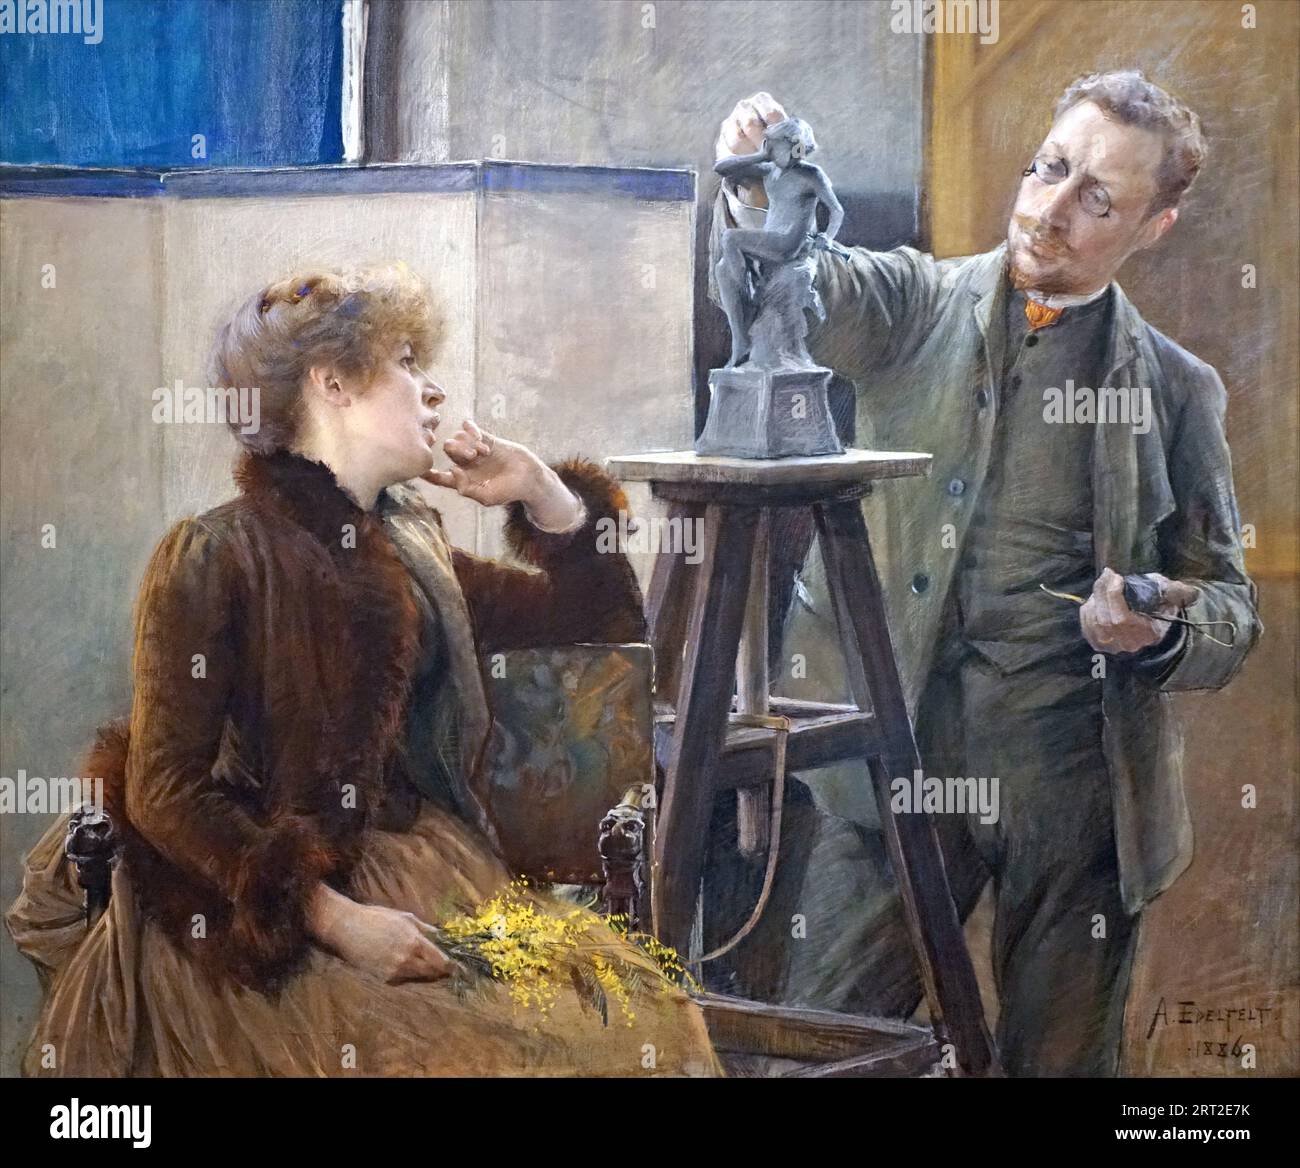 Portrait of the Sculptor Ville Vallgren (1855-1940) and his Wife Antoinette, 1886. Found in the collection of the G&#xf6;teborgs Konstmuseum. Stock Photo